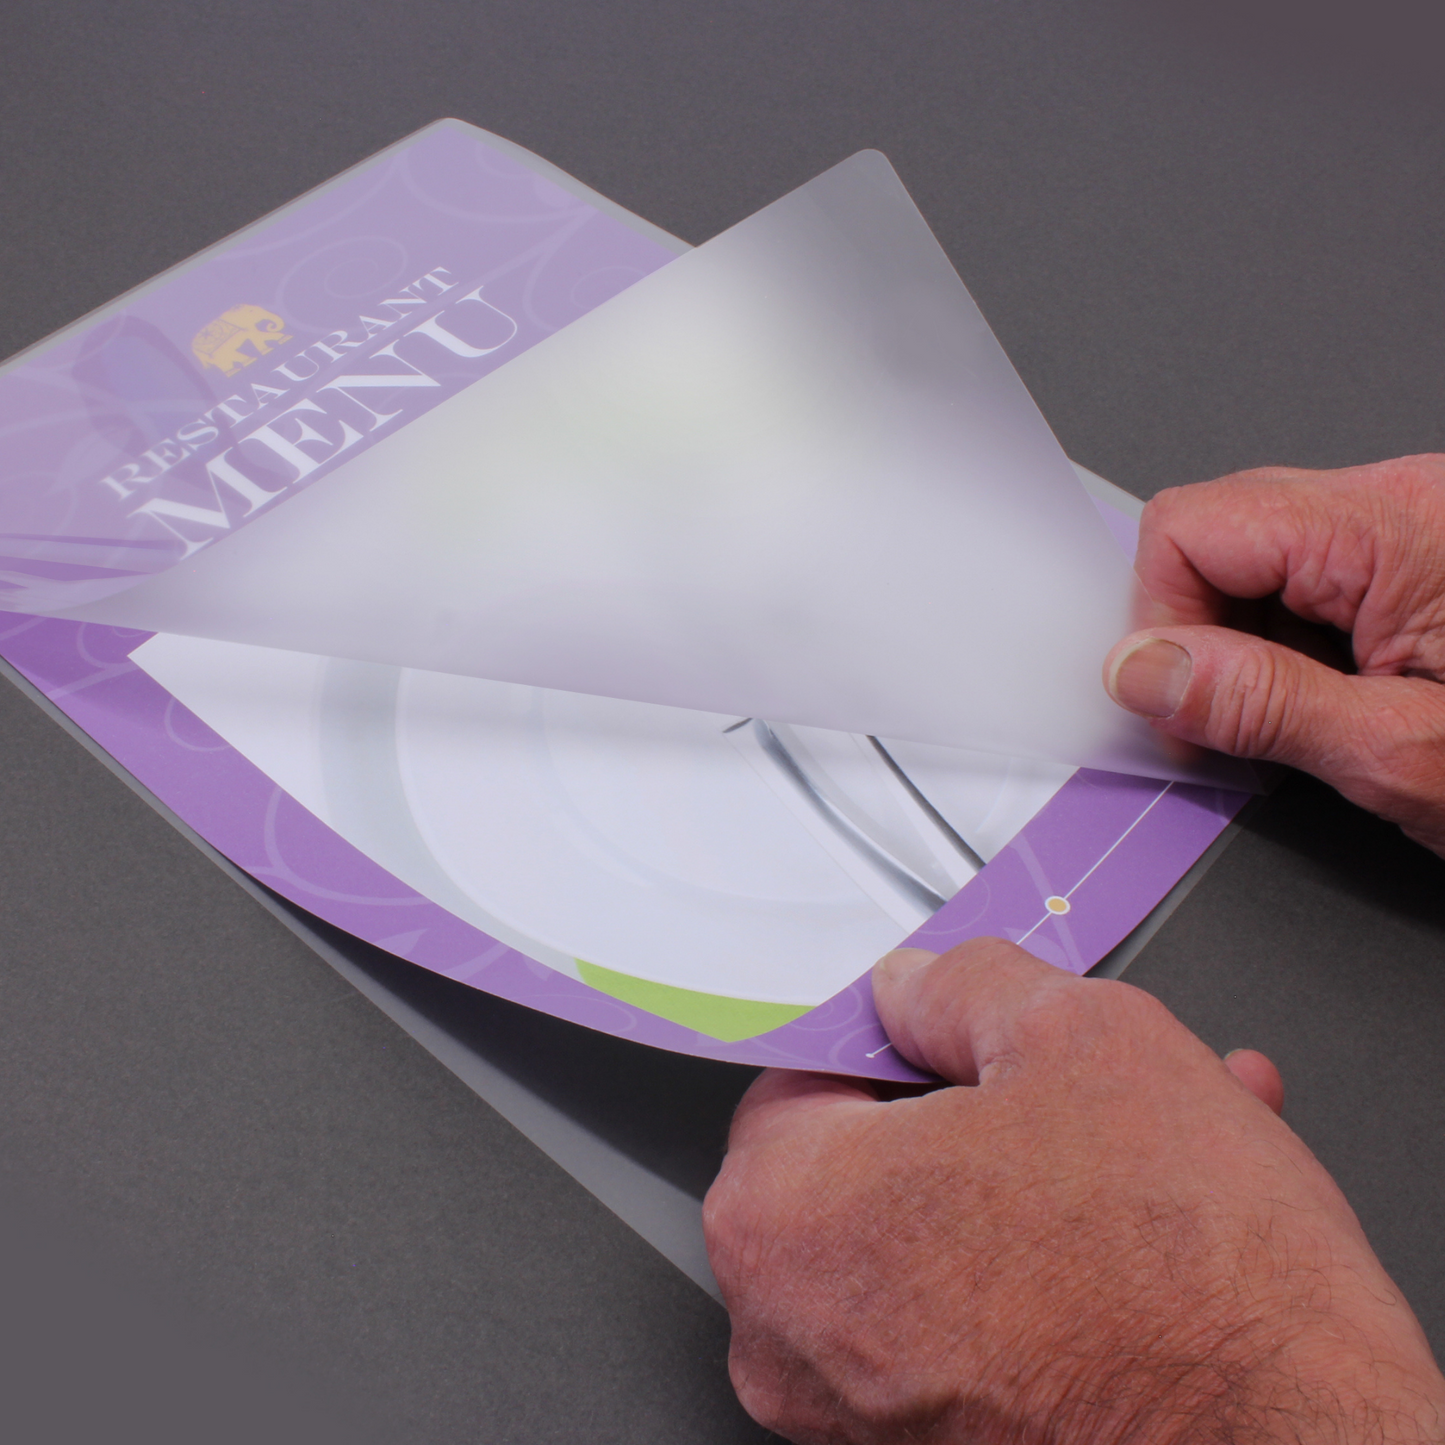 A person's hands peeling open an A4 gloss laminating pouch, 250 micron, with a restaurant menu about to be inserted, depicting the process of preparing items for lamination.